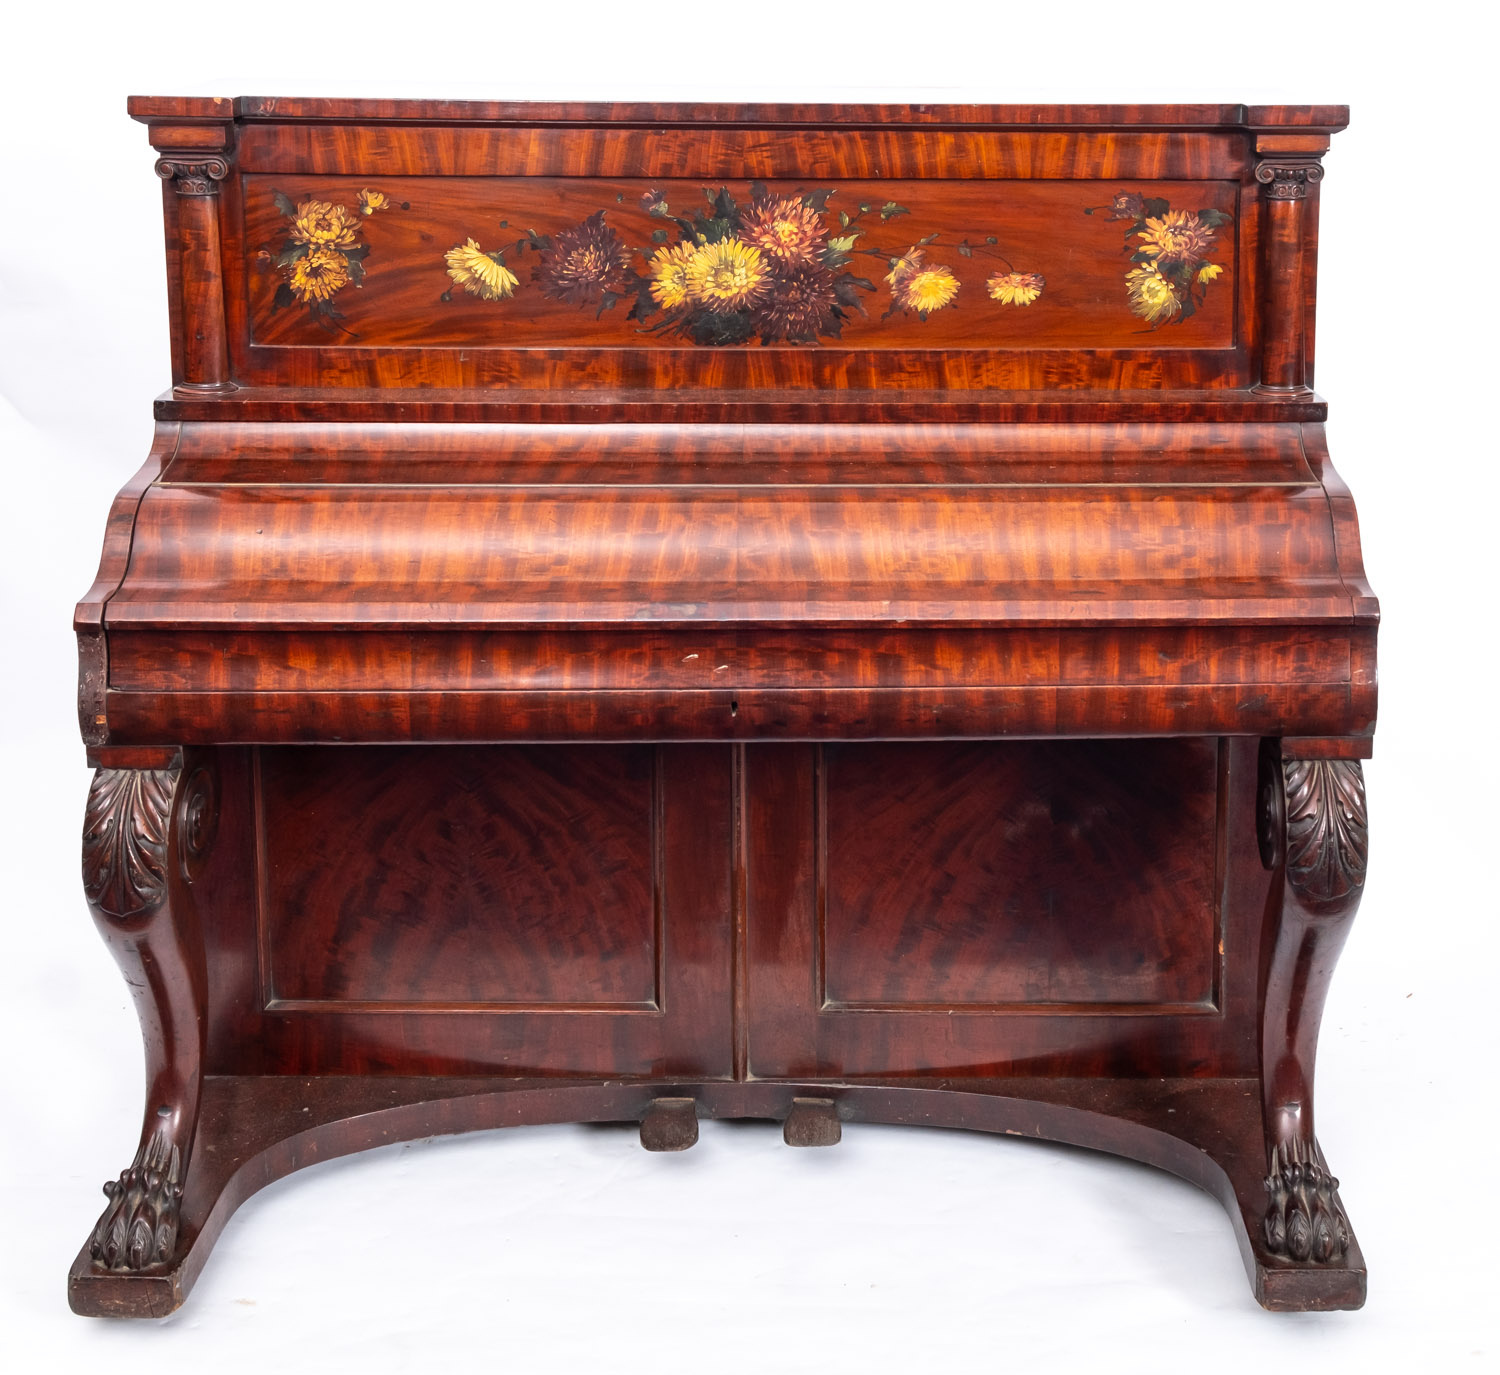 An Early 19th Century mahogany upright piano by George Peachey, 73, Bishopsgate St, Within, London,